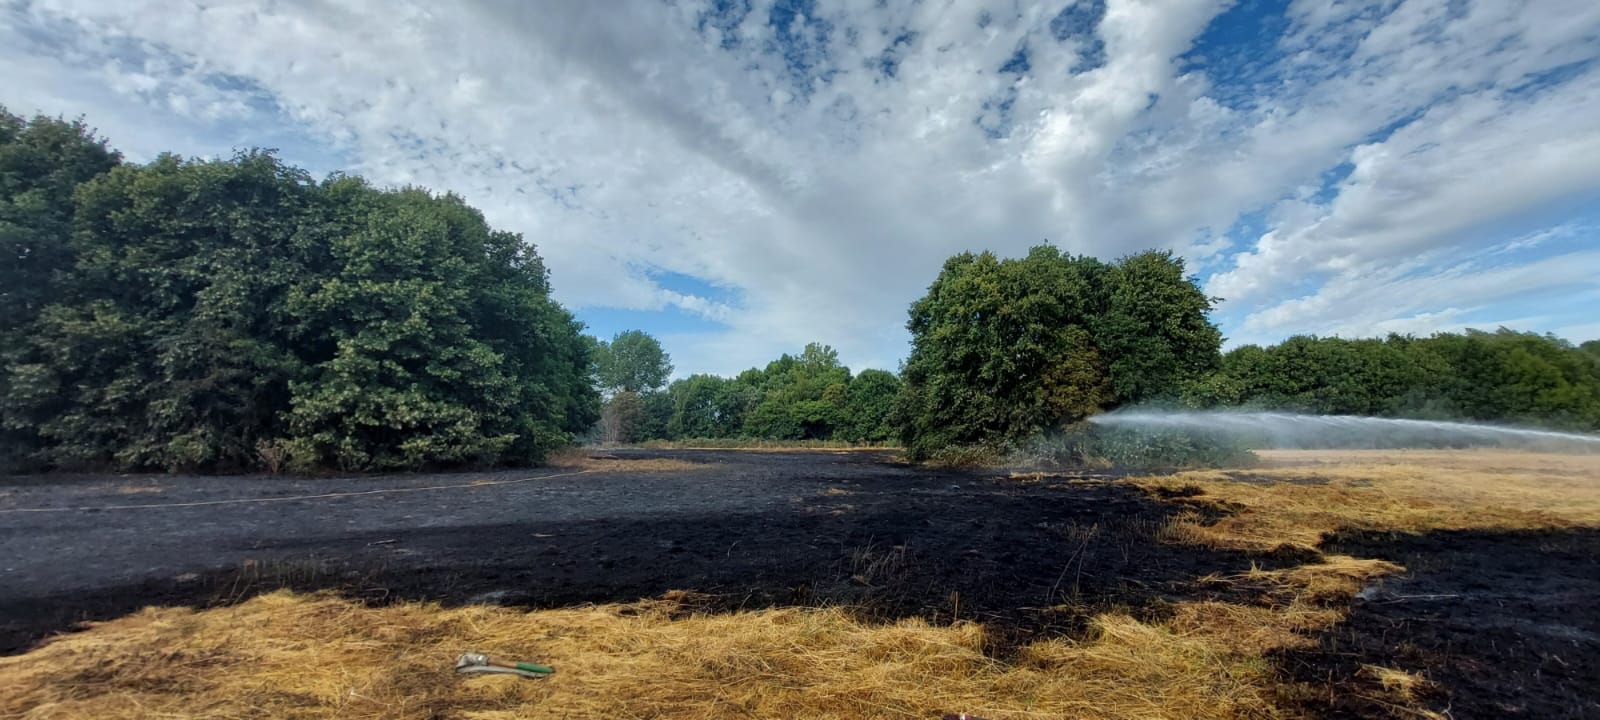 A meadow obliterated by fire at Morden Hall Park, London in July (National Trust/PA)